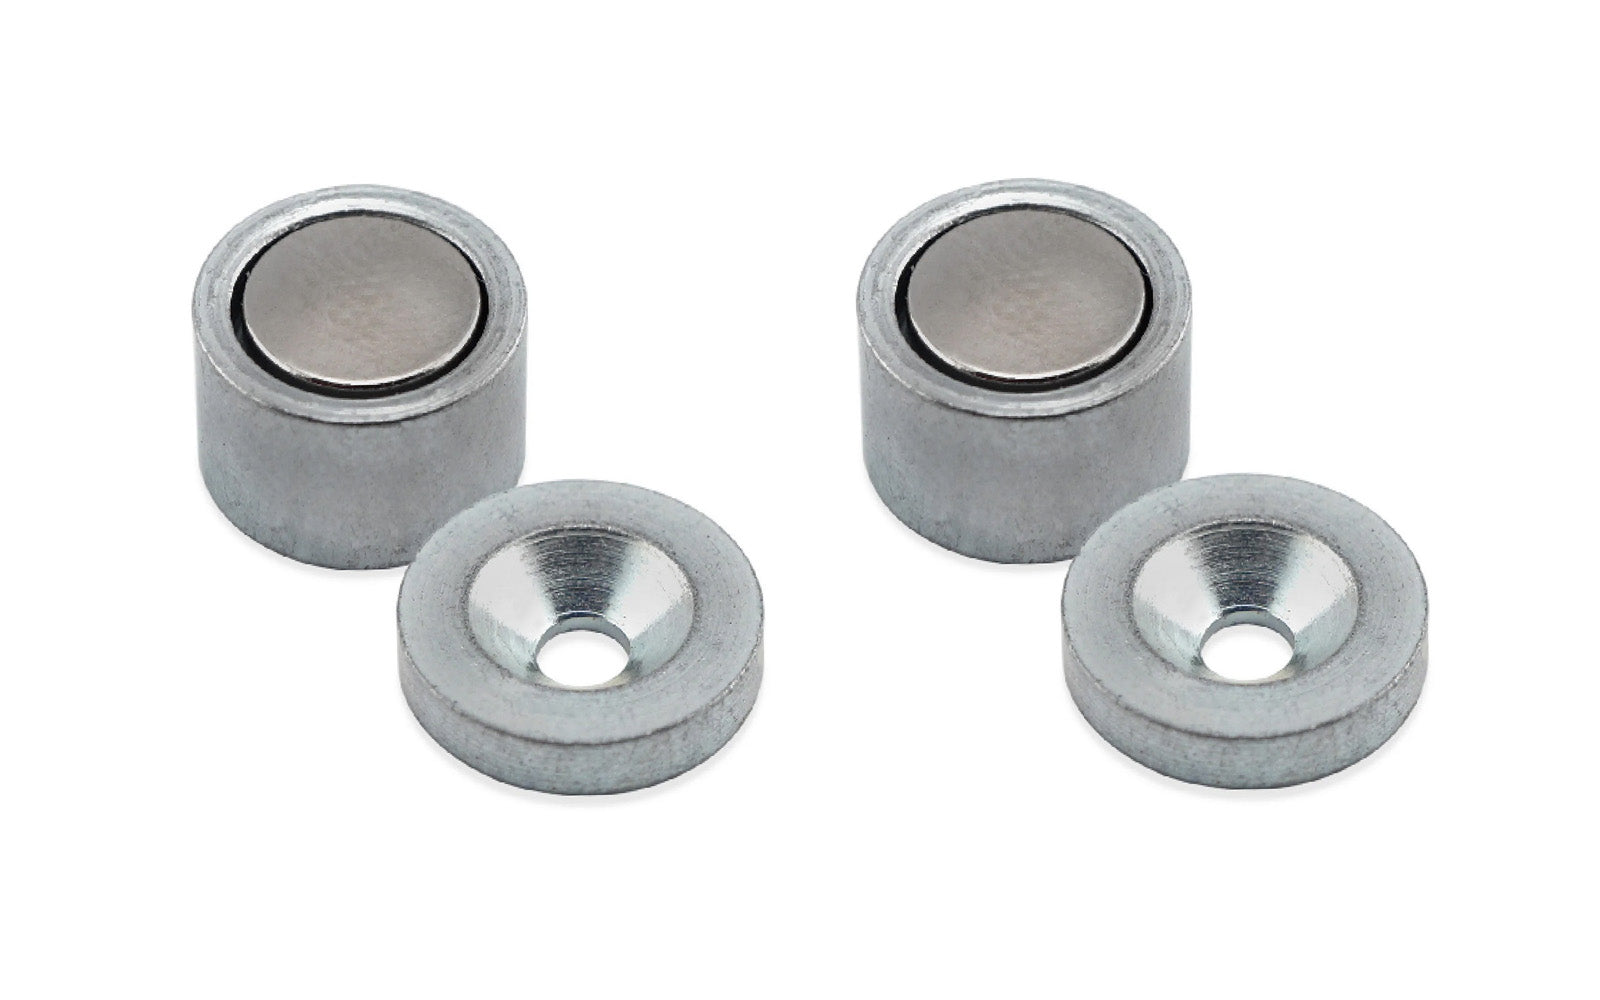 Neodymium Latch Magnet Kit - 2 Pack. Designed to be used as latches for cabinet doors, chests, displays & other flush closures. Max force: 6 lbs. Very strong & powerful neodymium magnets. 1/2" diameter x 1/4" thickness. 2 Pack. 095421075713. Master Magnets Model 07571